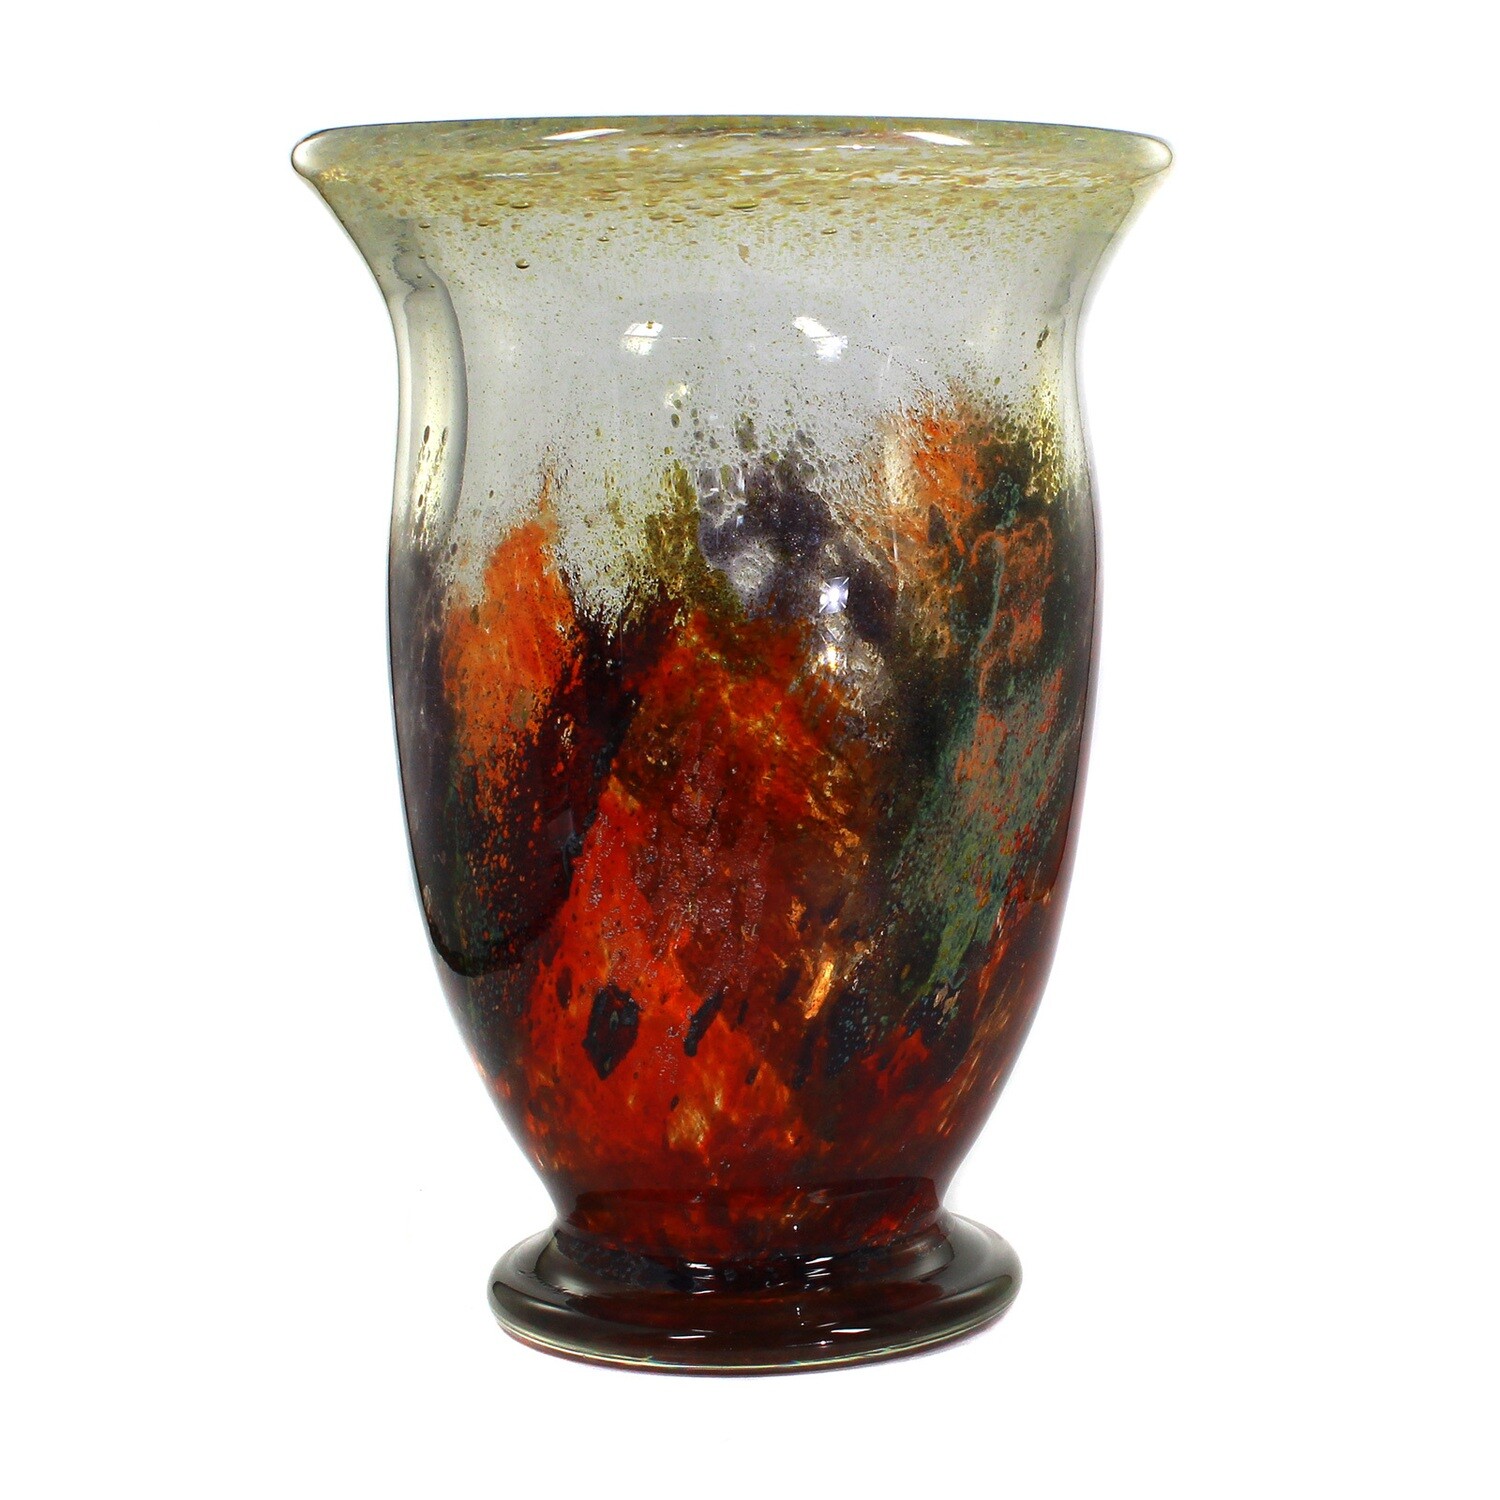 Tall WMF Ikora vase with powder inclusions, form E691/5027 around 1936